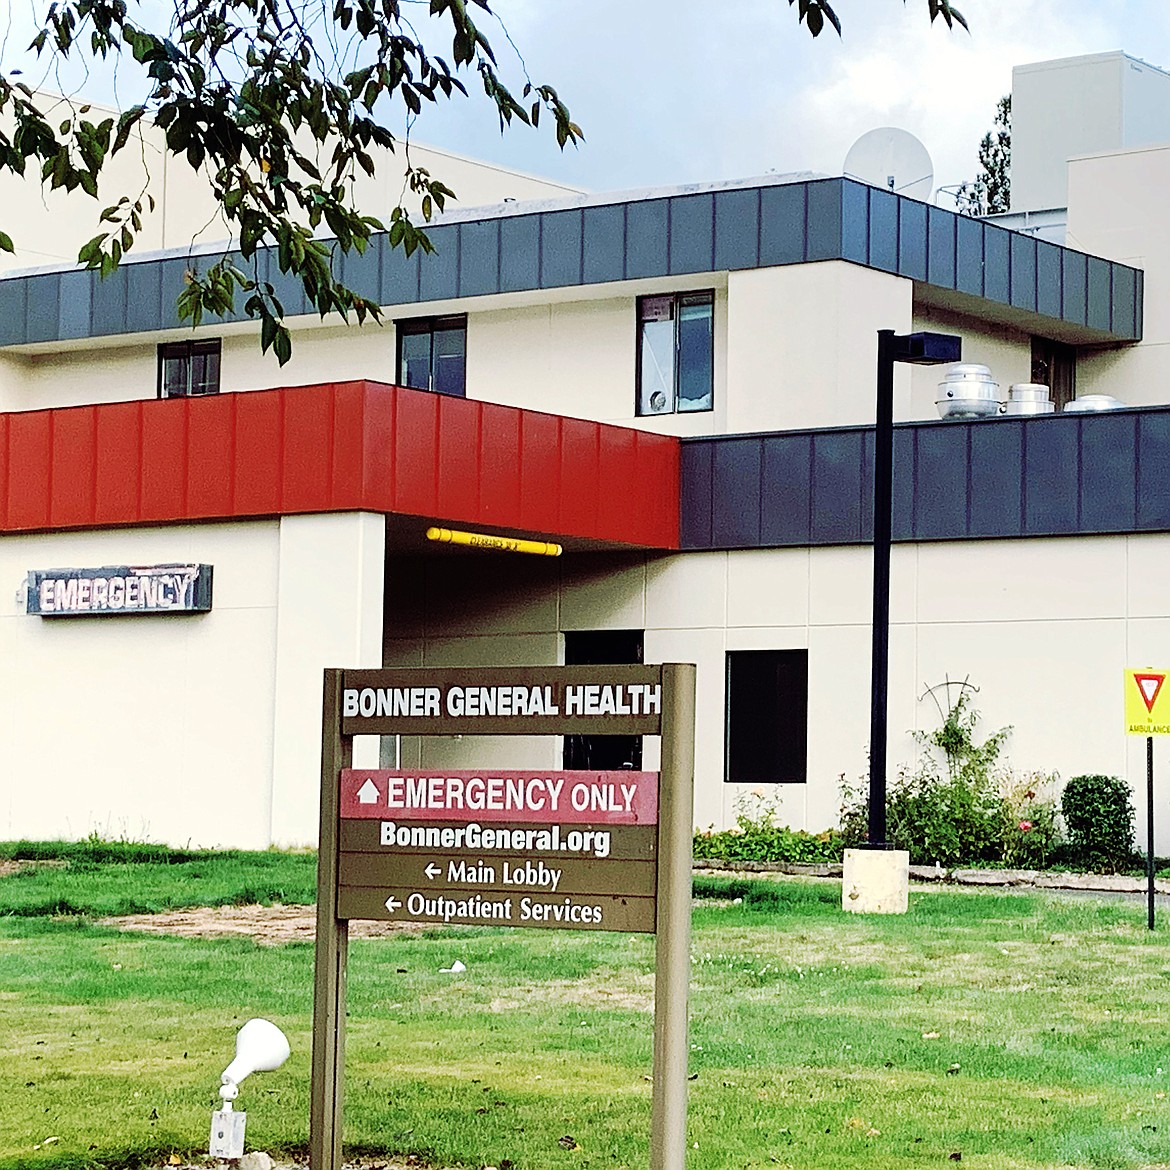 A photo of Bonner General Health's Emergency Department entrance.